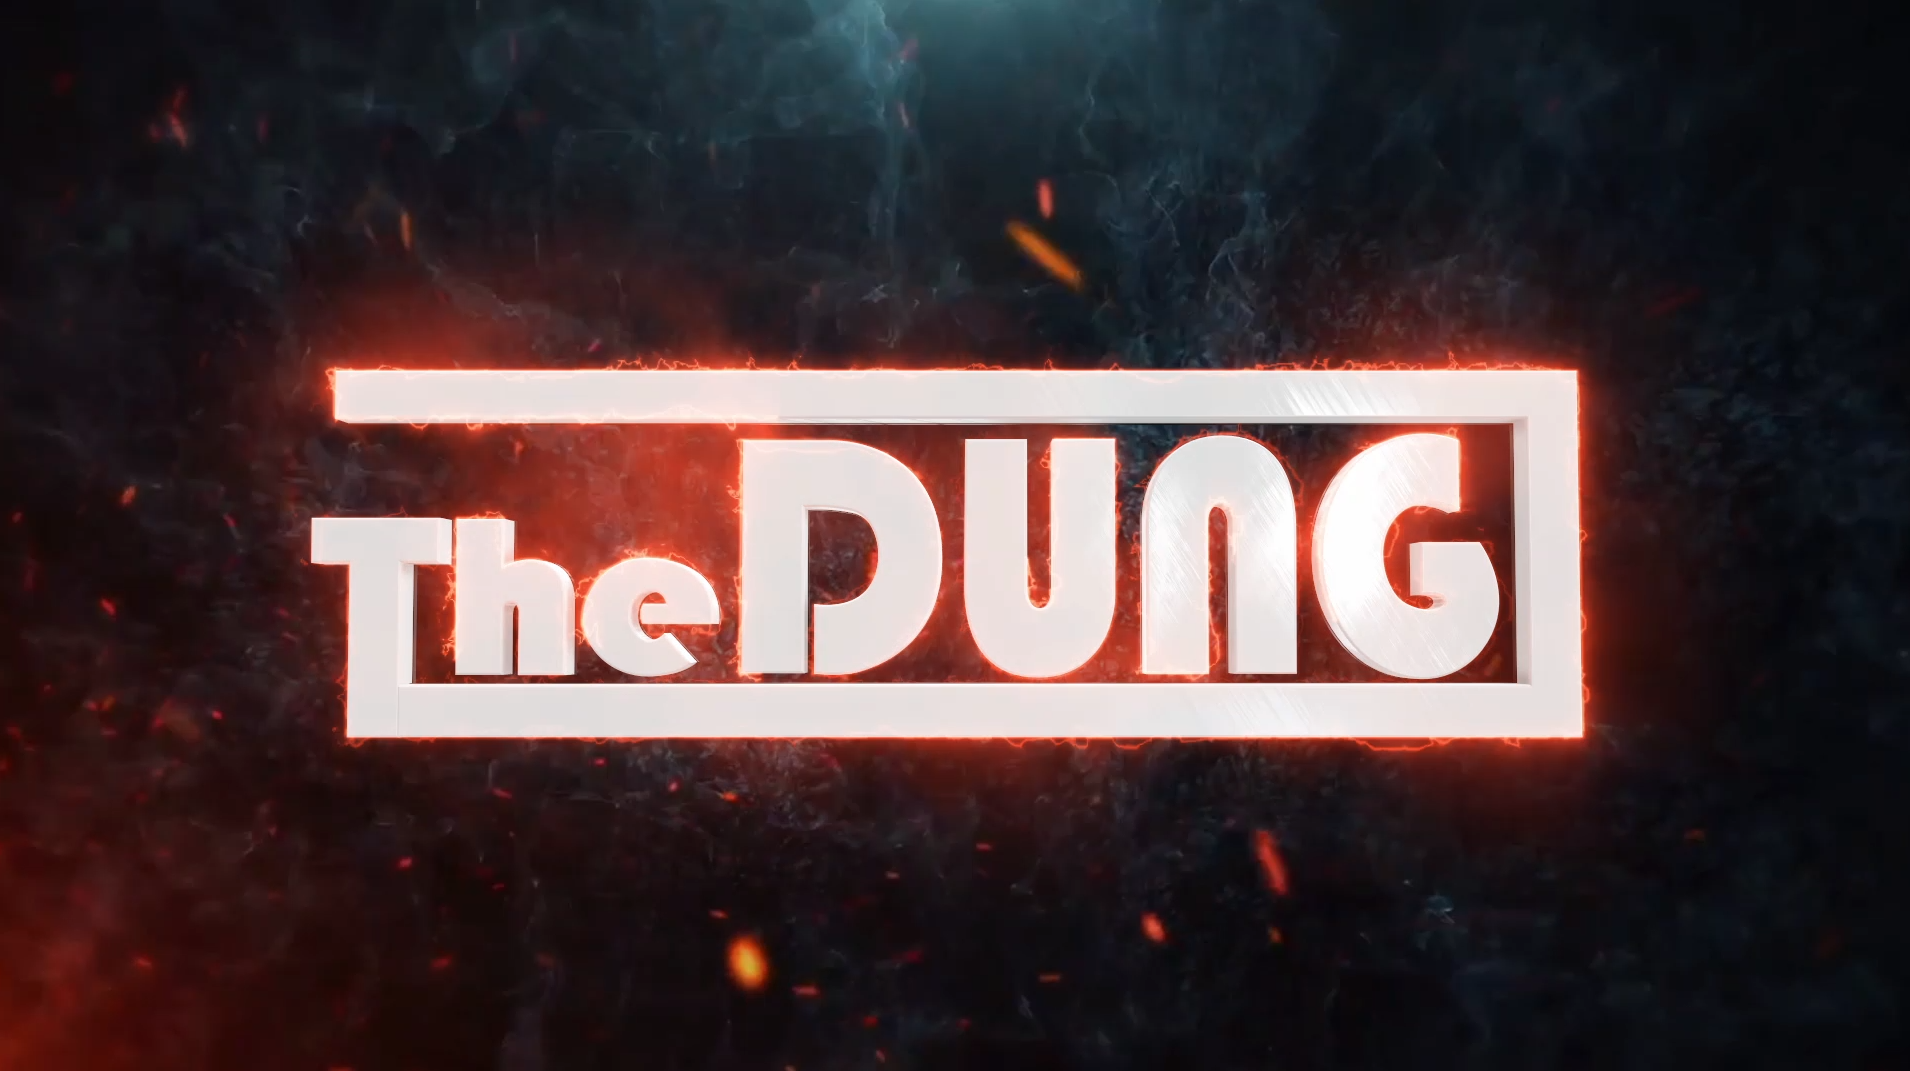 The dung logo on fire animation with smoke